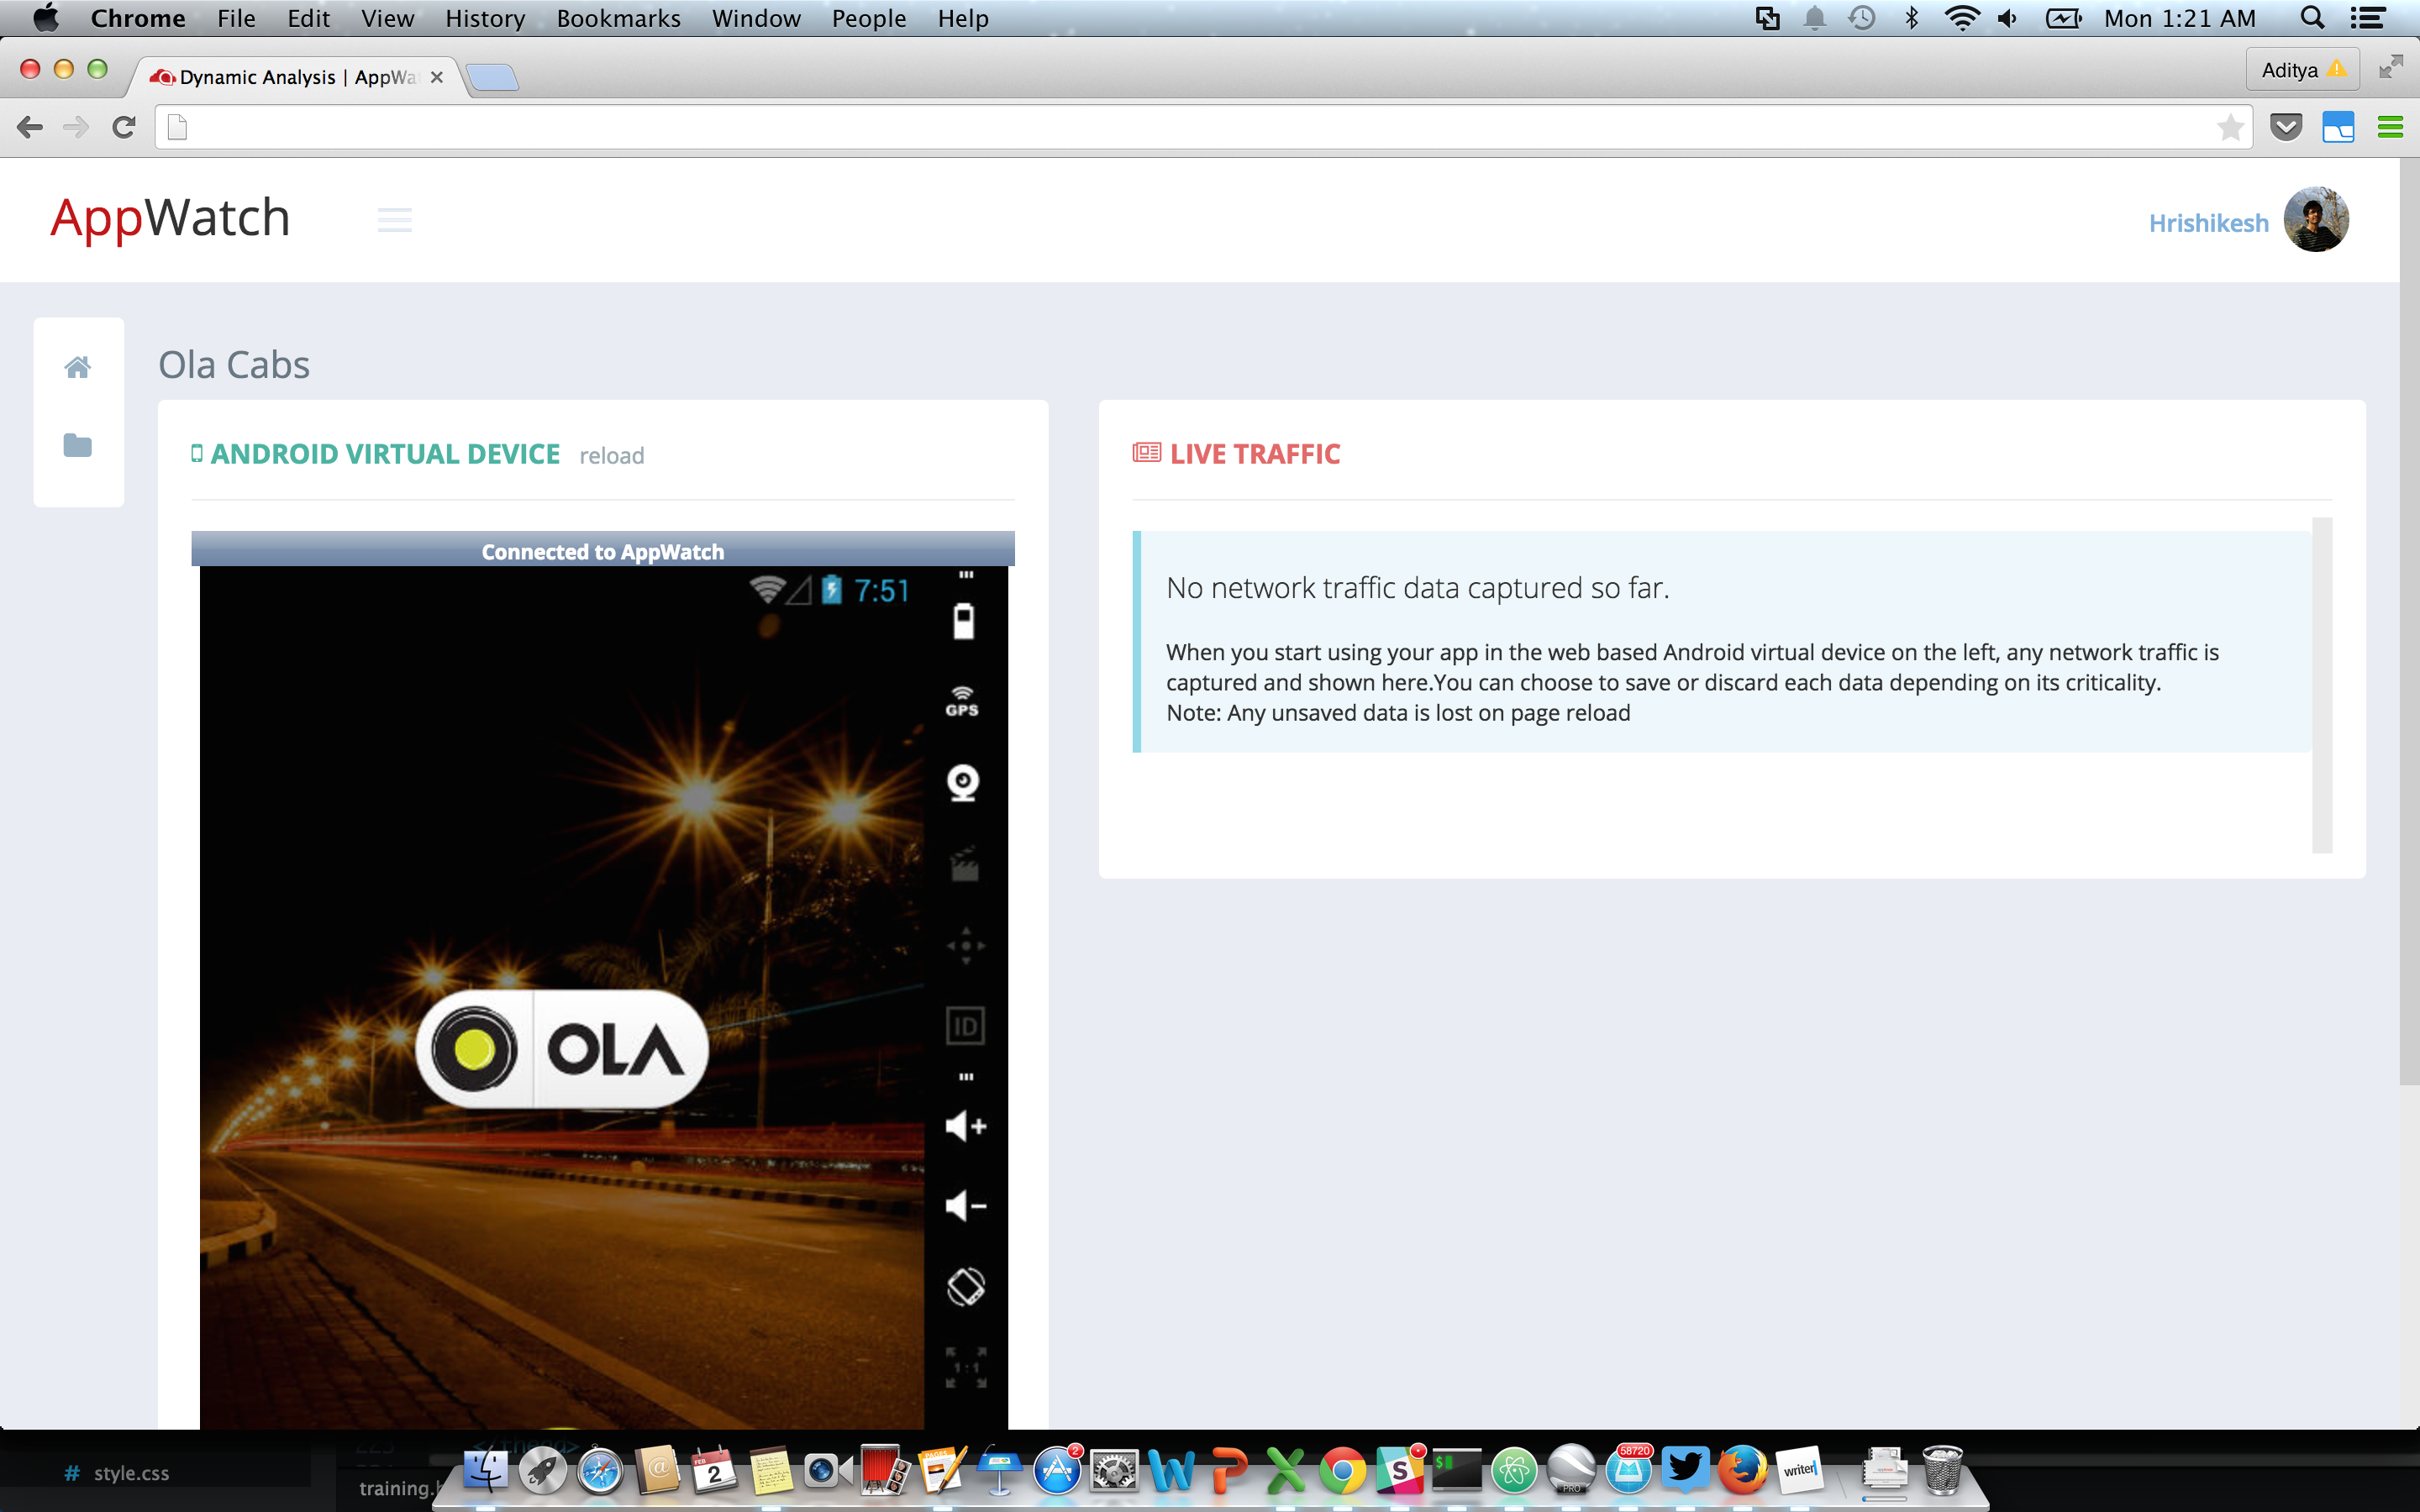 Analysing Ola Cabs in AppWatch 